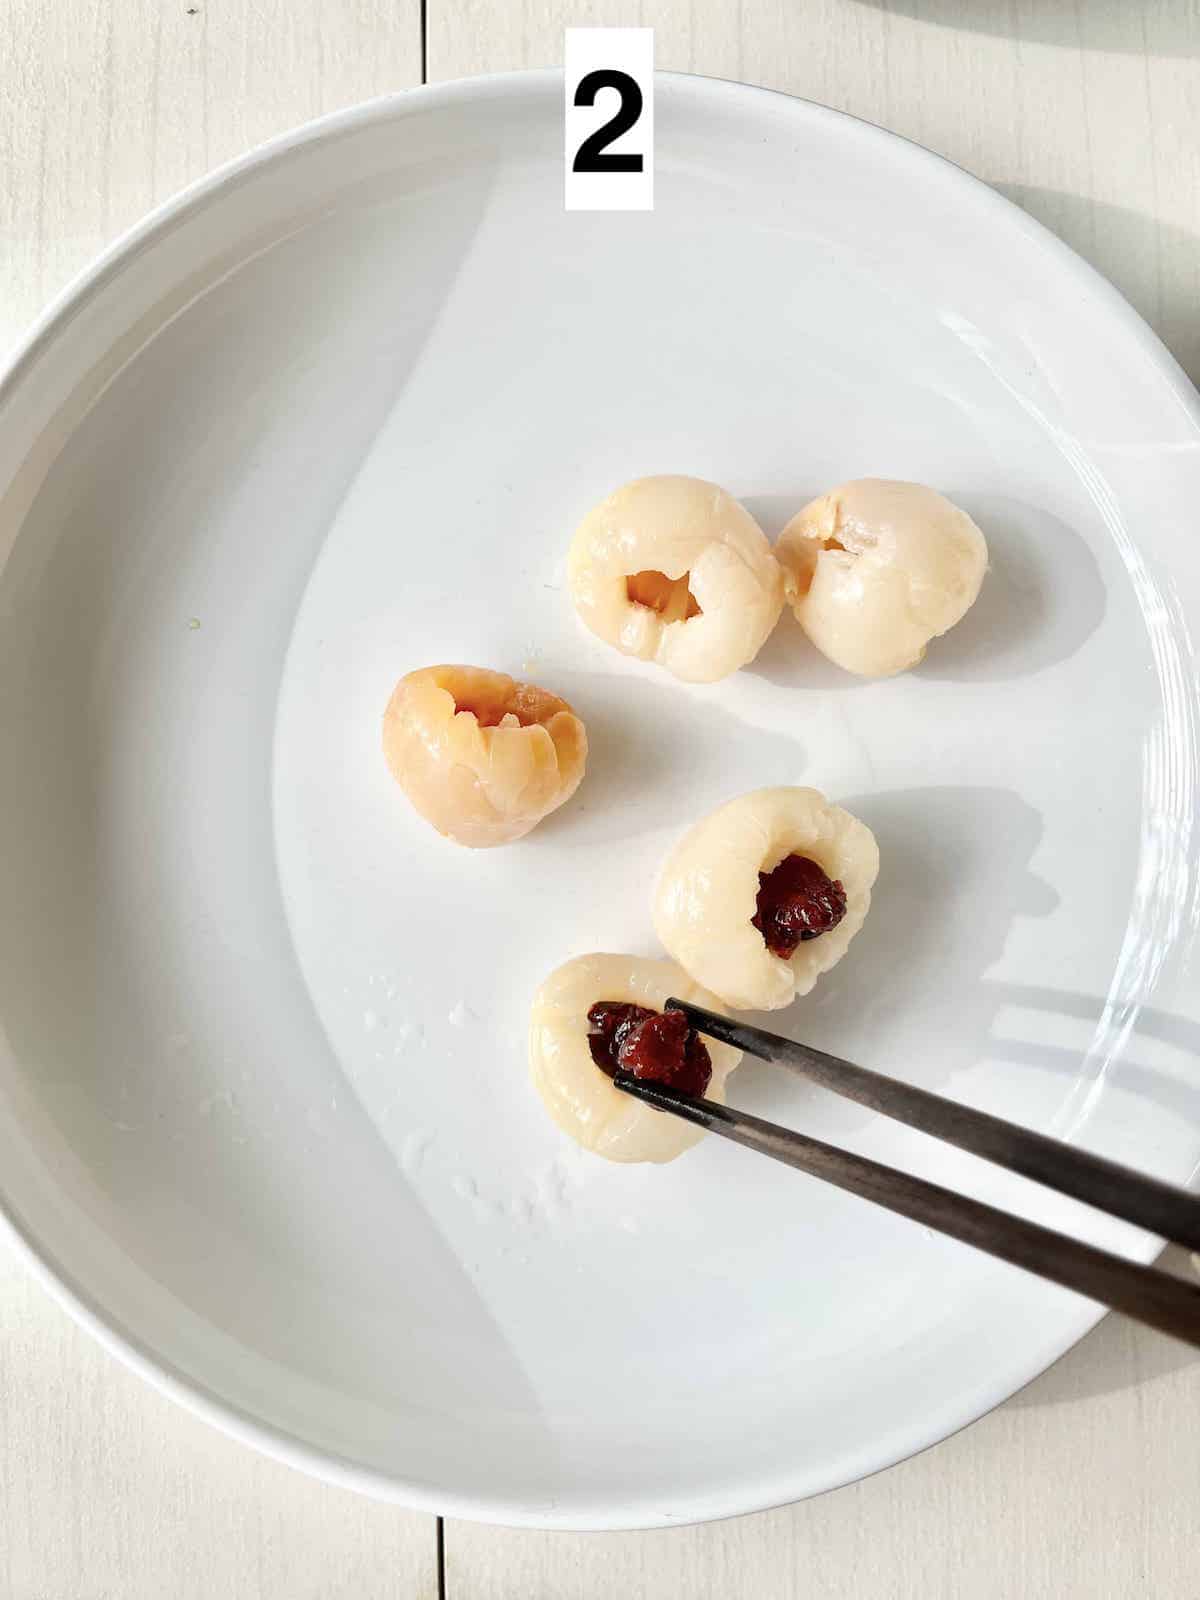 Stuffing dried cranberries into the hole of a lychee fruit.